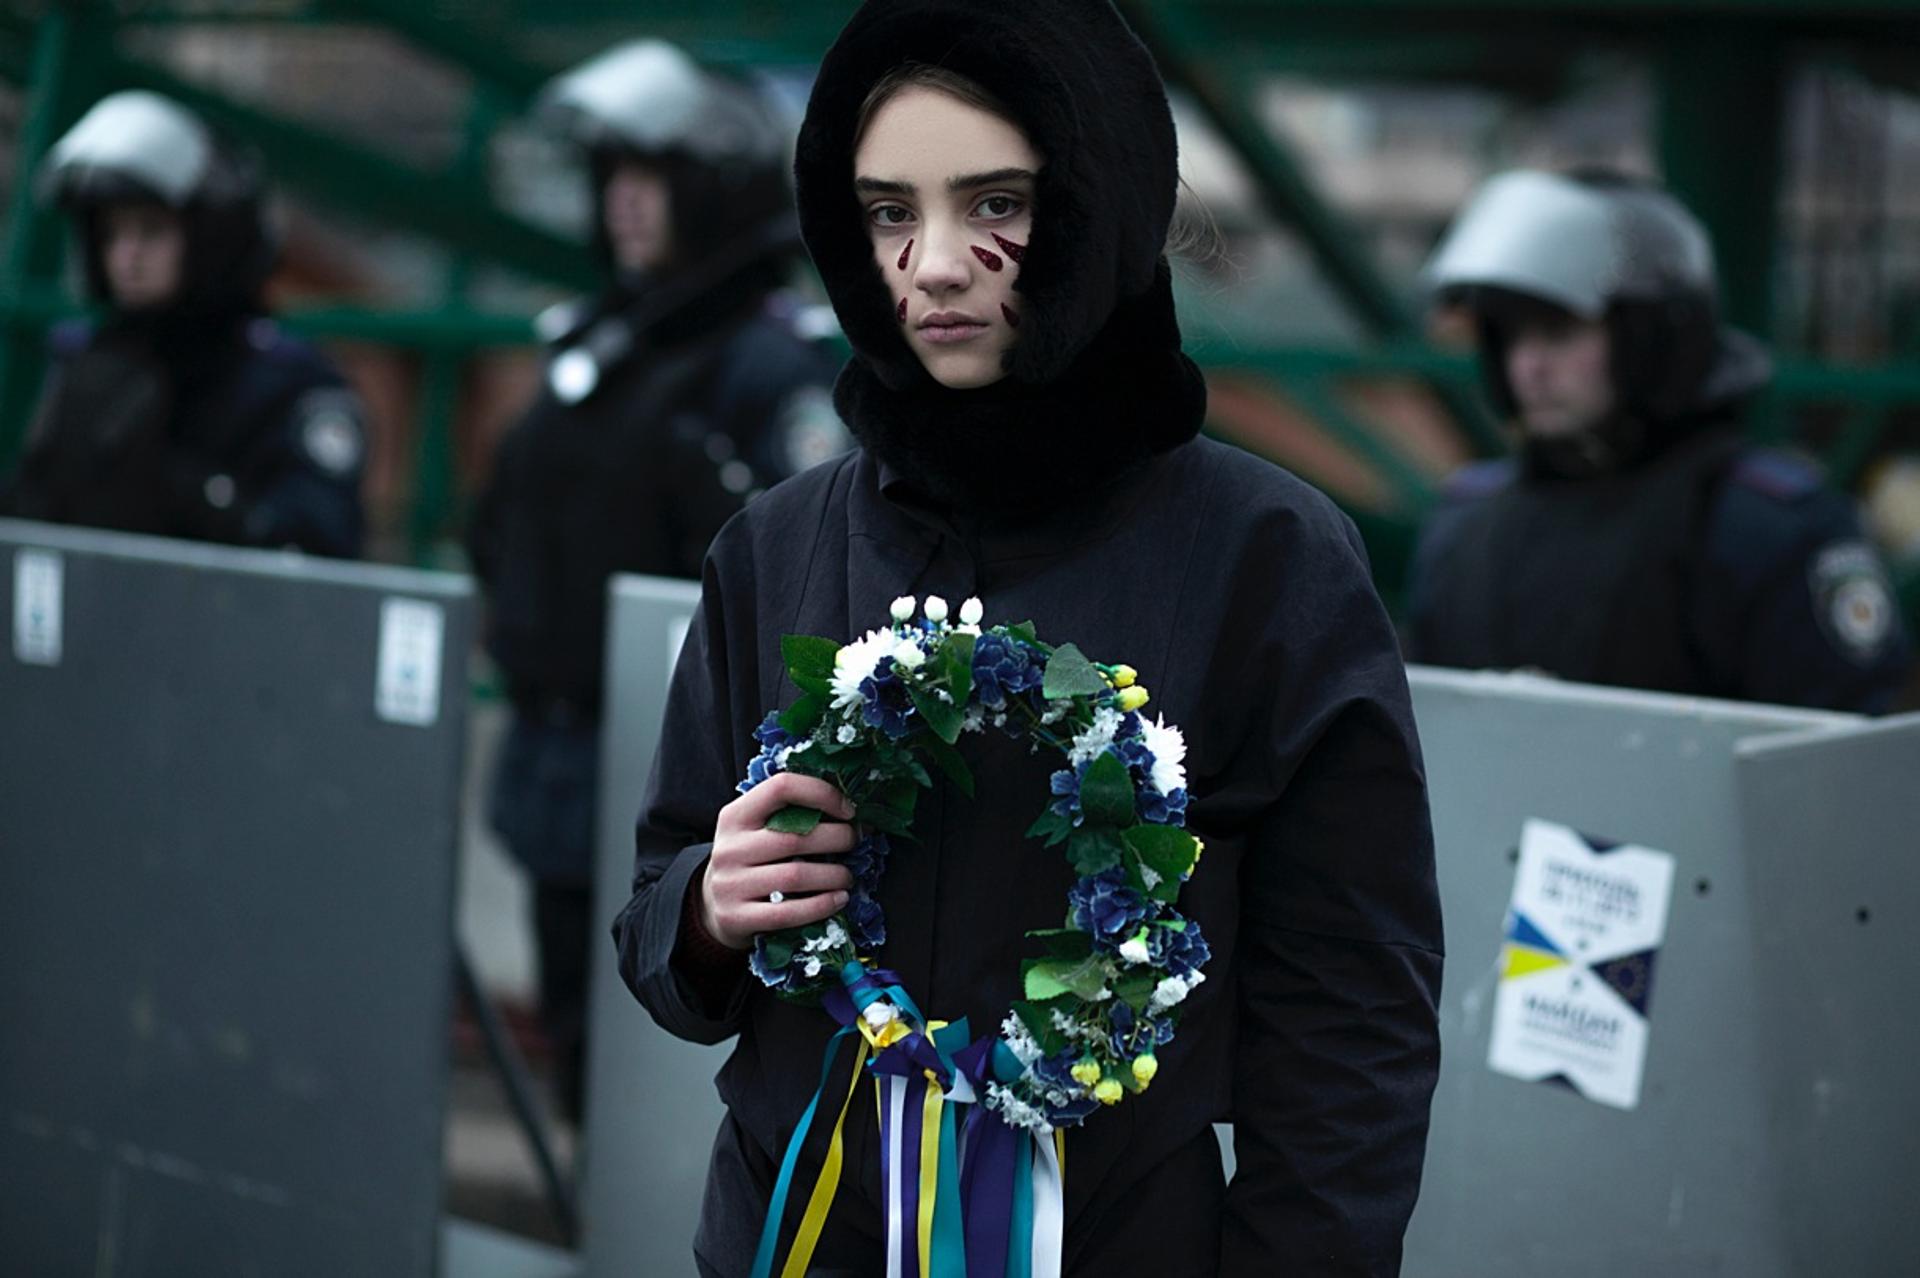 FASHION DISSIDENCE: 16-Year-Old Ukrainian Photographer Shoots Protest Images in Kiev